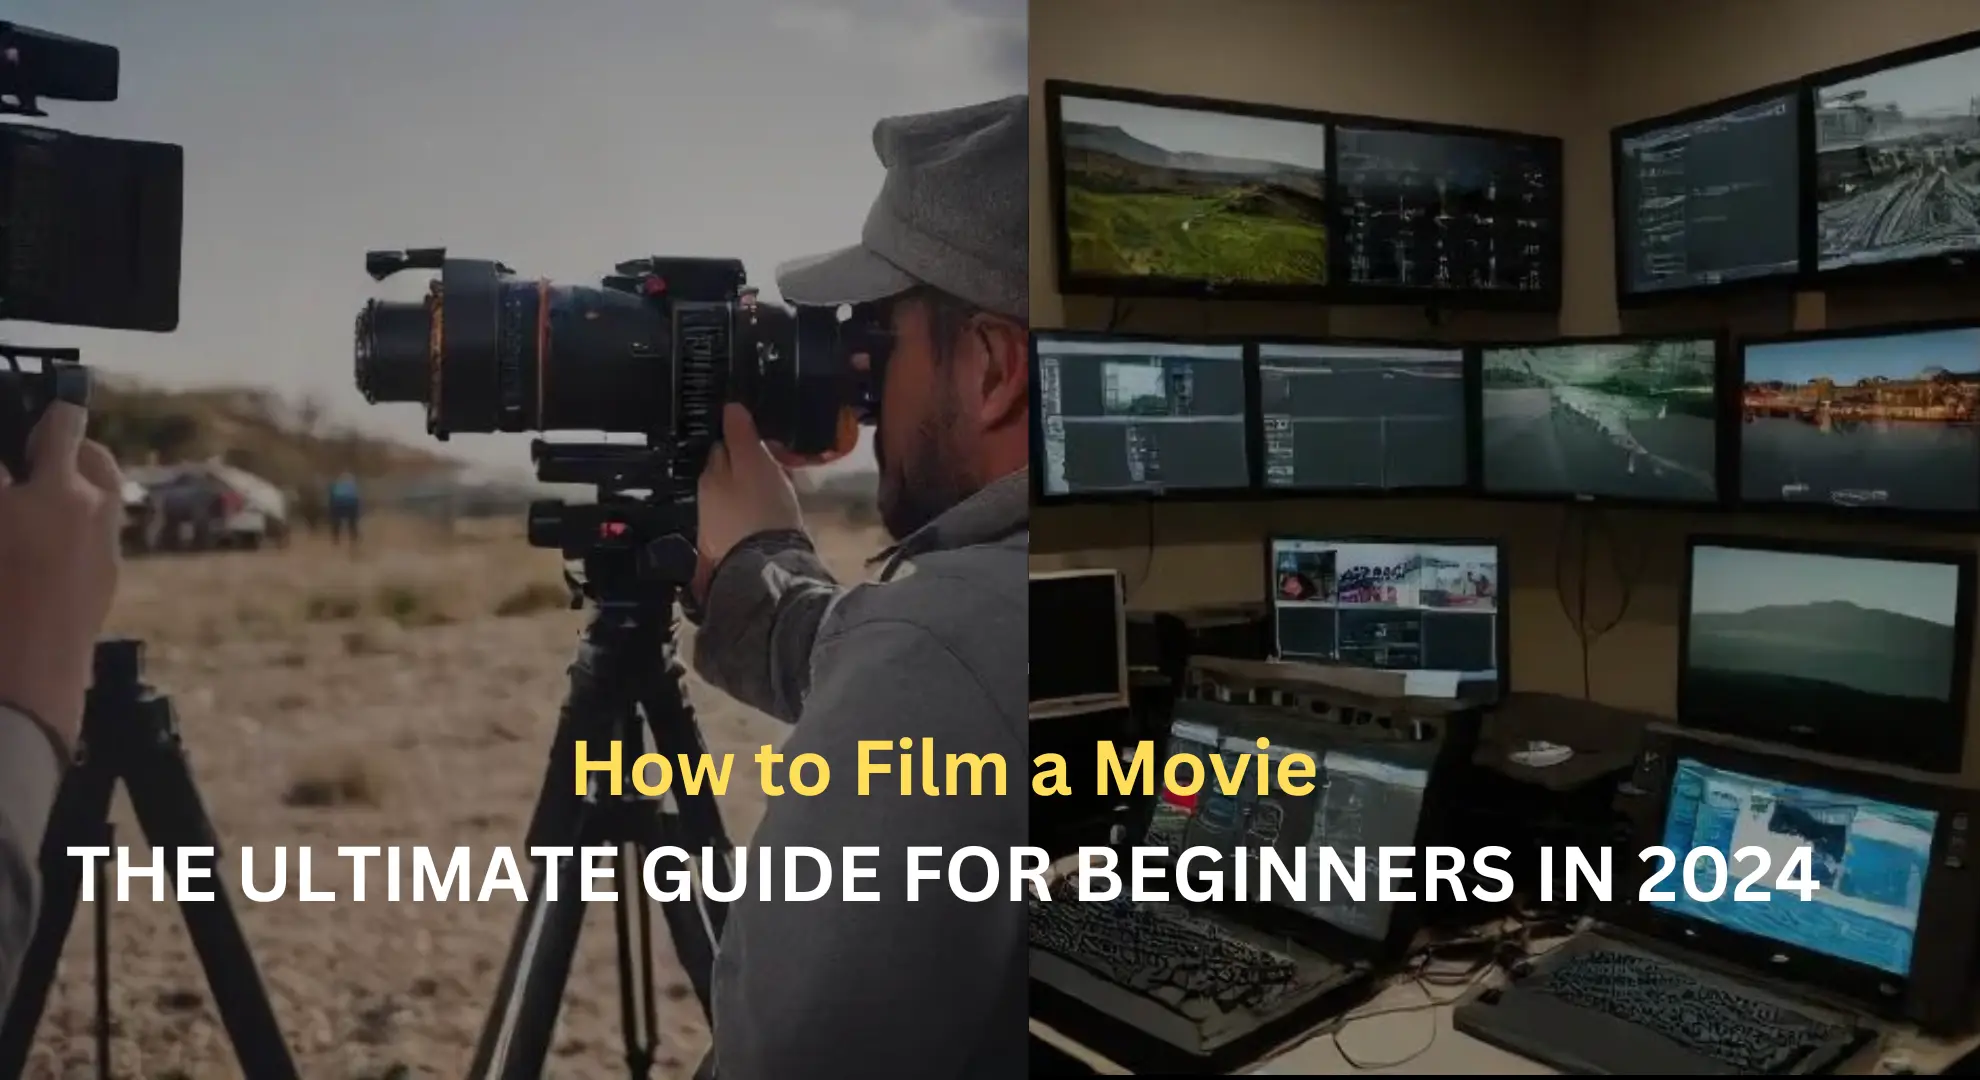 How to Film a Movie The Ultimate Guide for Beginners in 2024